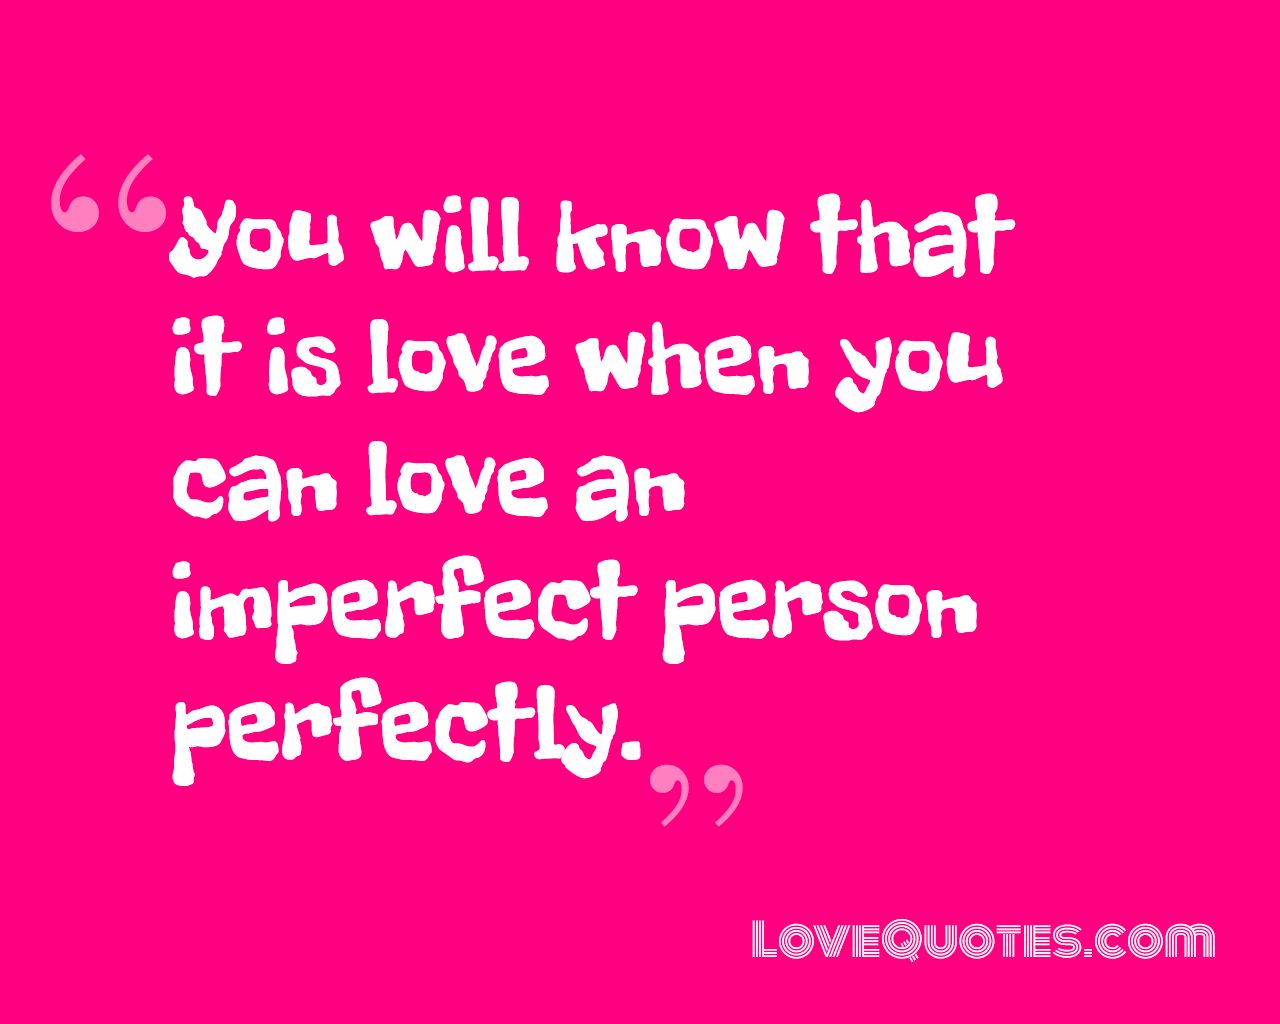 An Imperfect Person